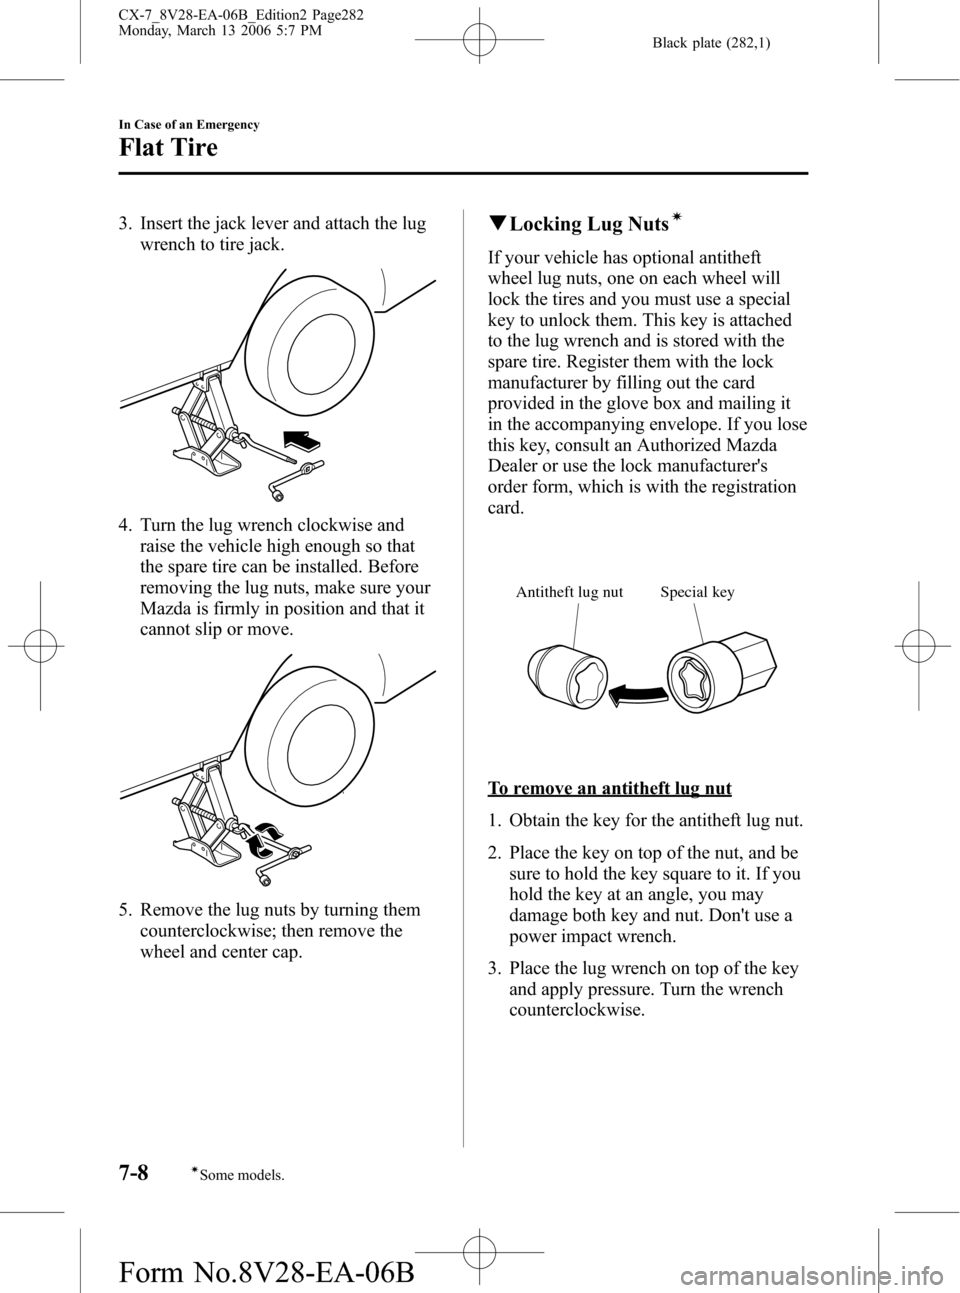 MAZDA MODEL CX-7 2007  Owners Manual (in English) Black plate (282,1)
3. Insert the jack lever and attach the lug
wrench to tire jack.
4. Turn the lug wrench clockwise and
raise the vehicle high enough so that
the spare tire can be installed. Before
